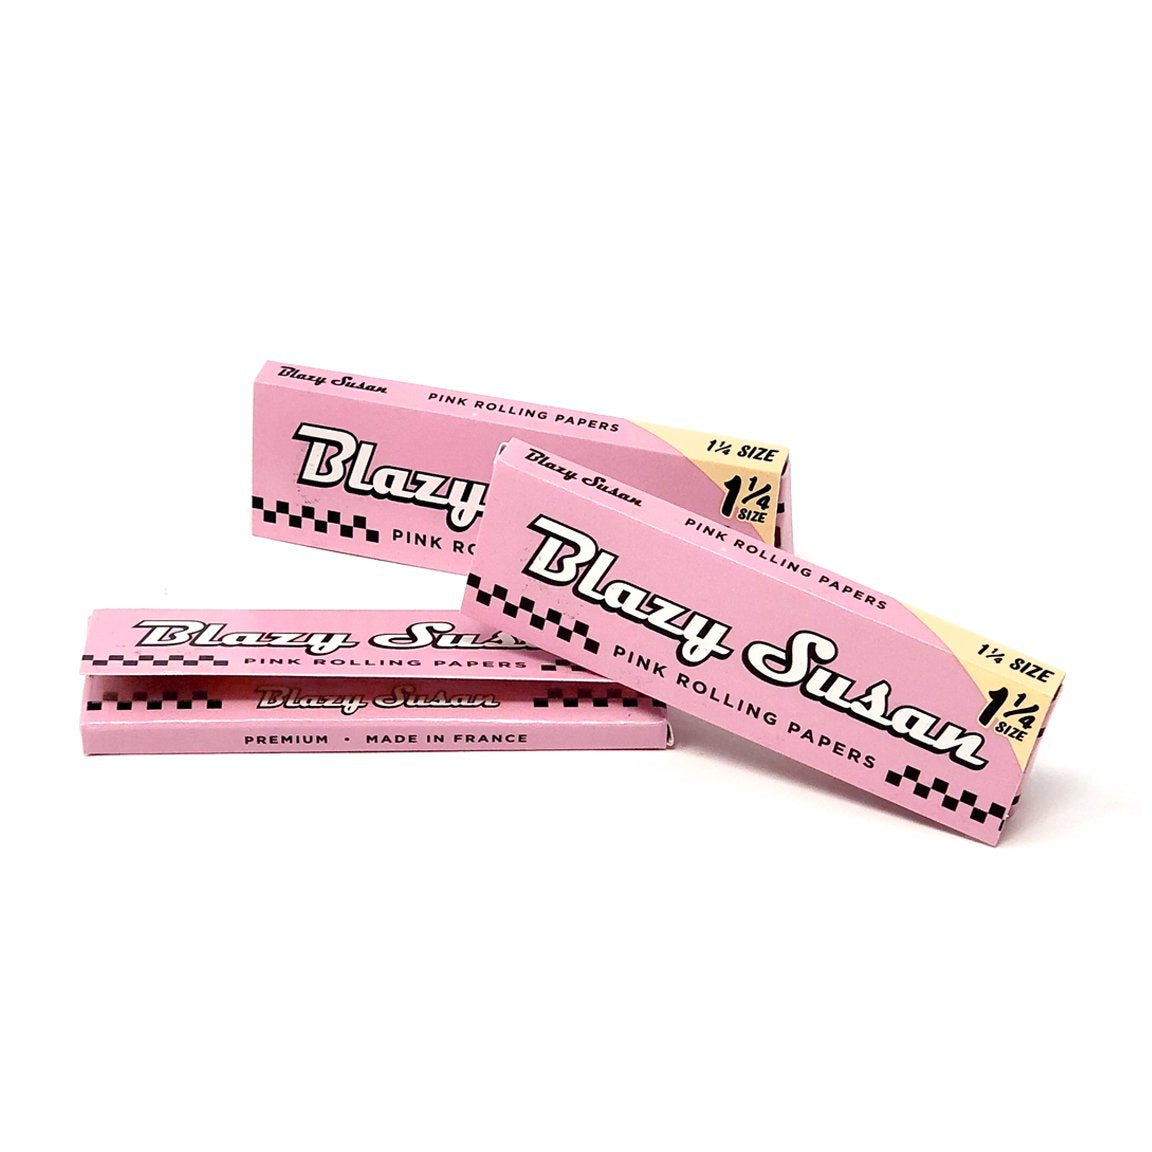 Blazy Susan 1 1/4" Size Rolling Papers